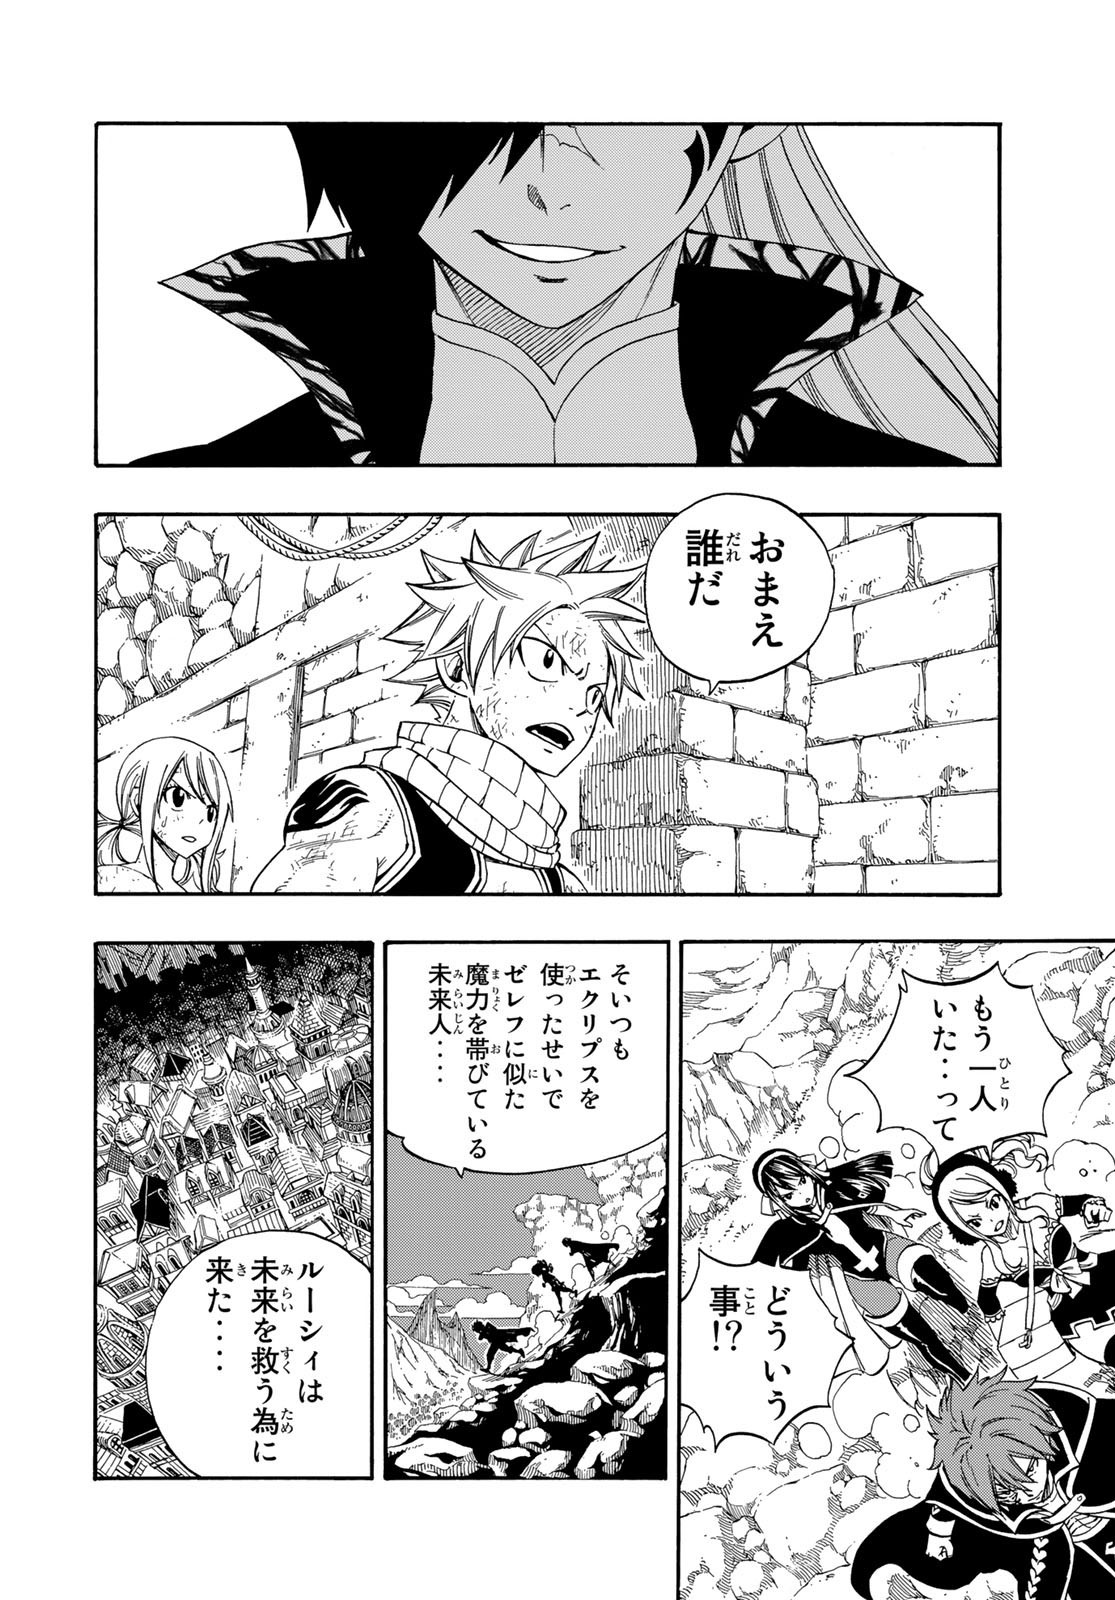 Weekly Shōnen Magazine - 週刊少年マガジン - Chapter 2024-27 - Page 448